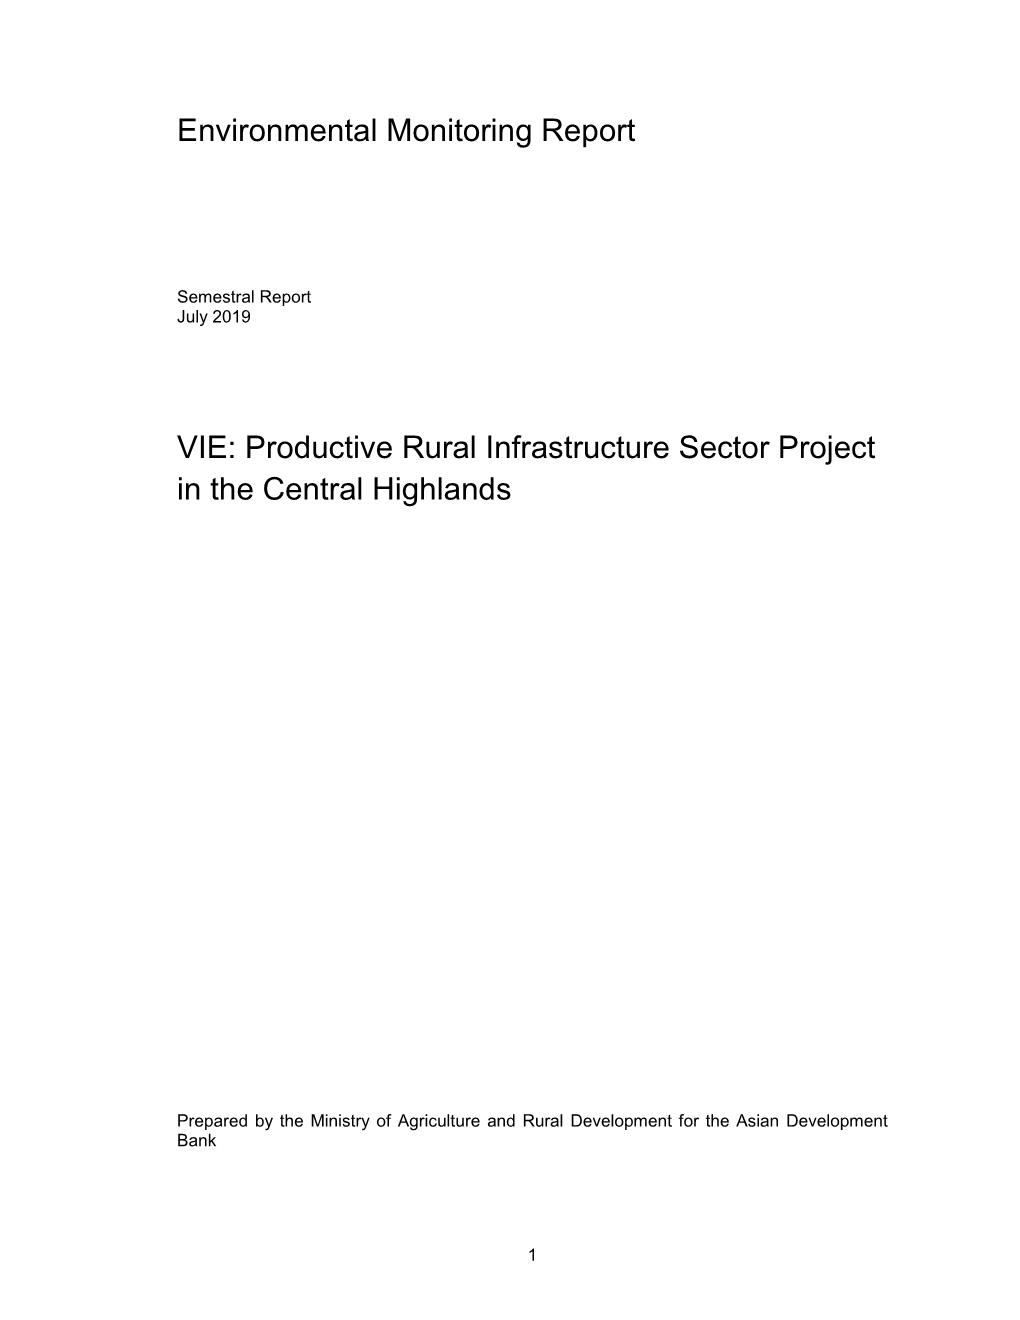 Productive Rural Infrastructure Sector Project in the Central Highlands